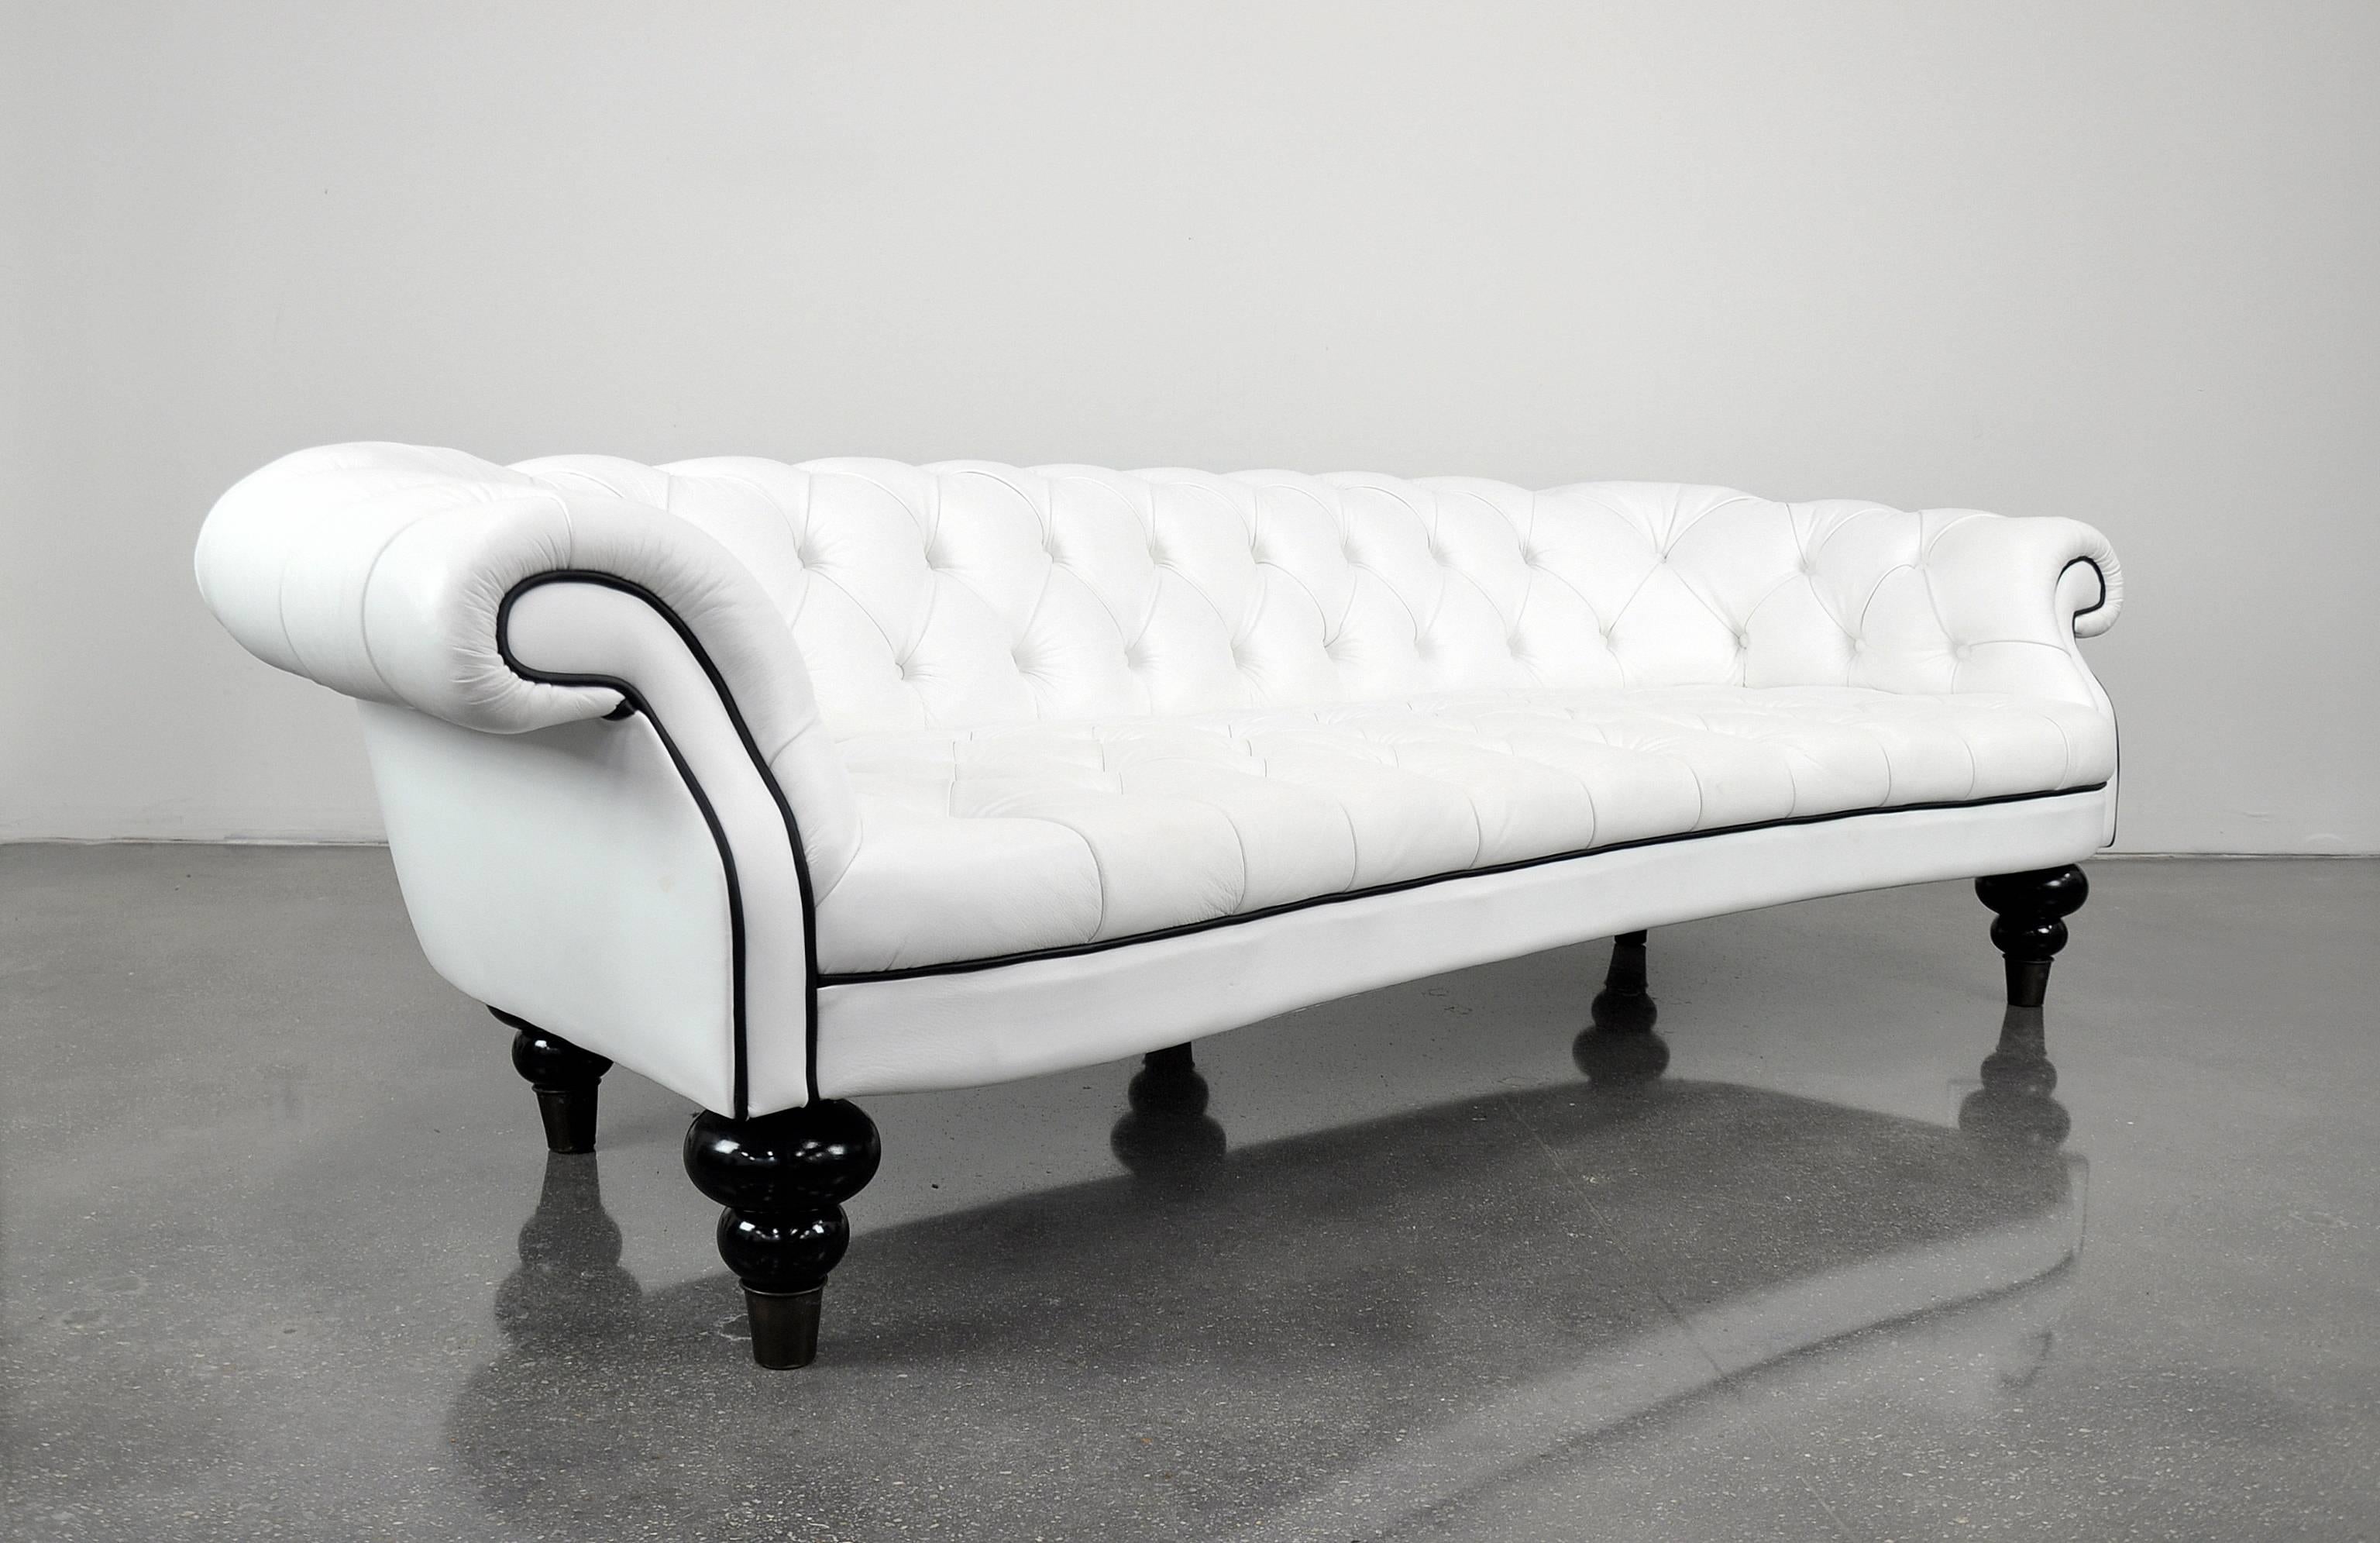 A limited edition tufted Vincent sofa, designed by Romeo Sozzi and custom made by the Italian master furniture maker Promemoria. The long, curved couch rests on five black lacquered turned wood legs with large solid brass caps. The sofa, originally